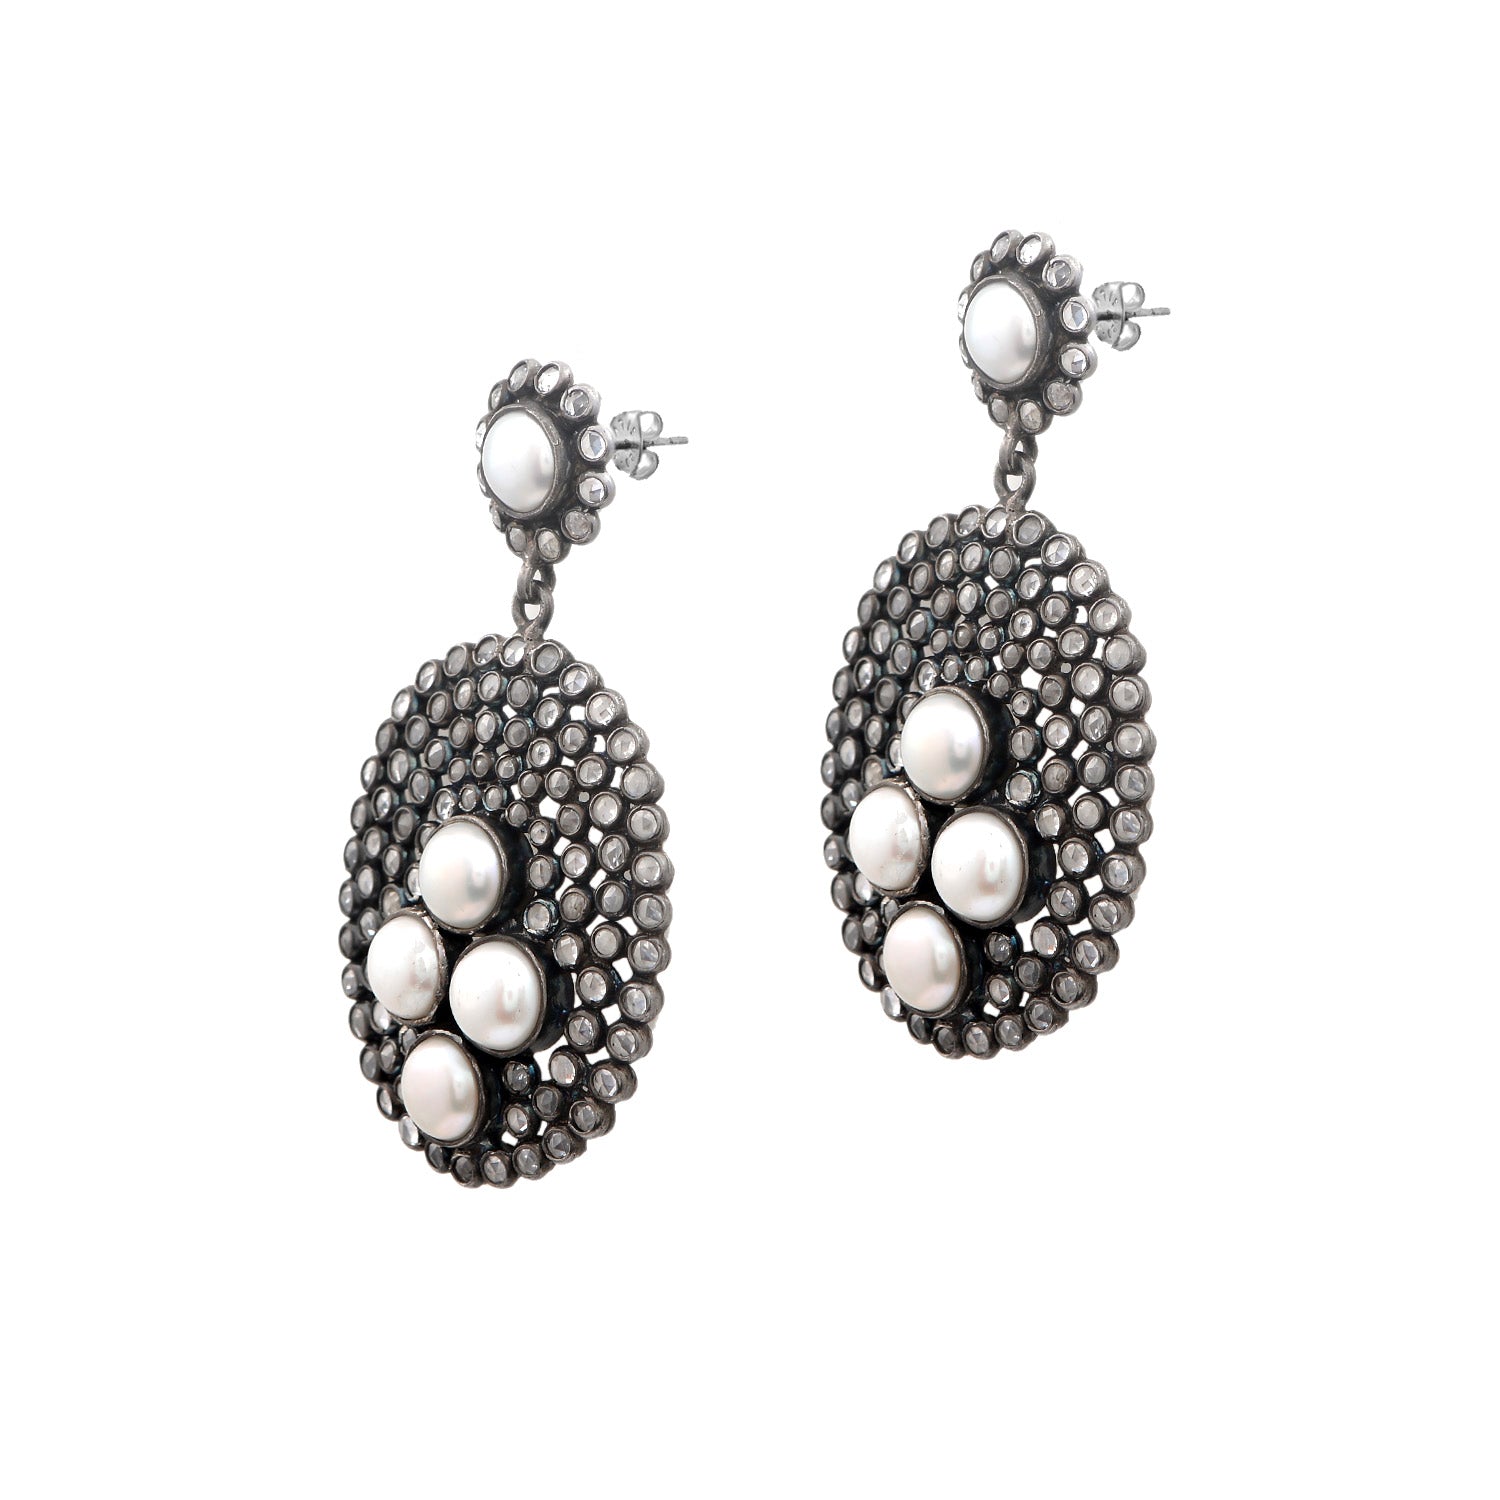 Magnificent Pearl and Topaz Silver Earrings